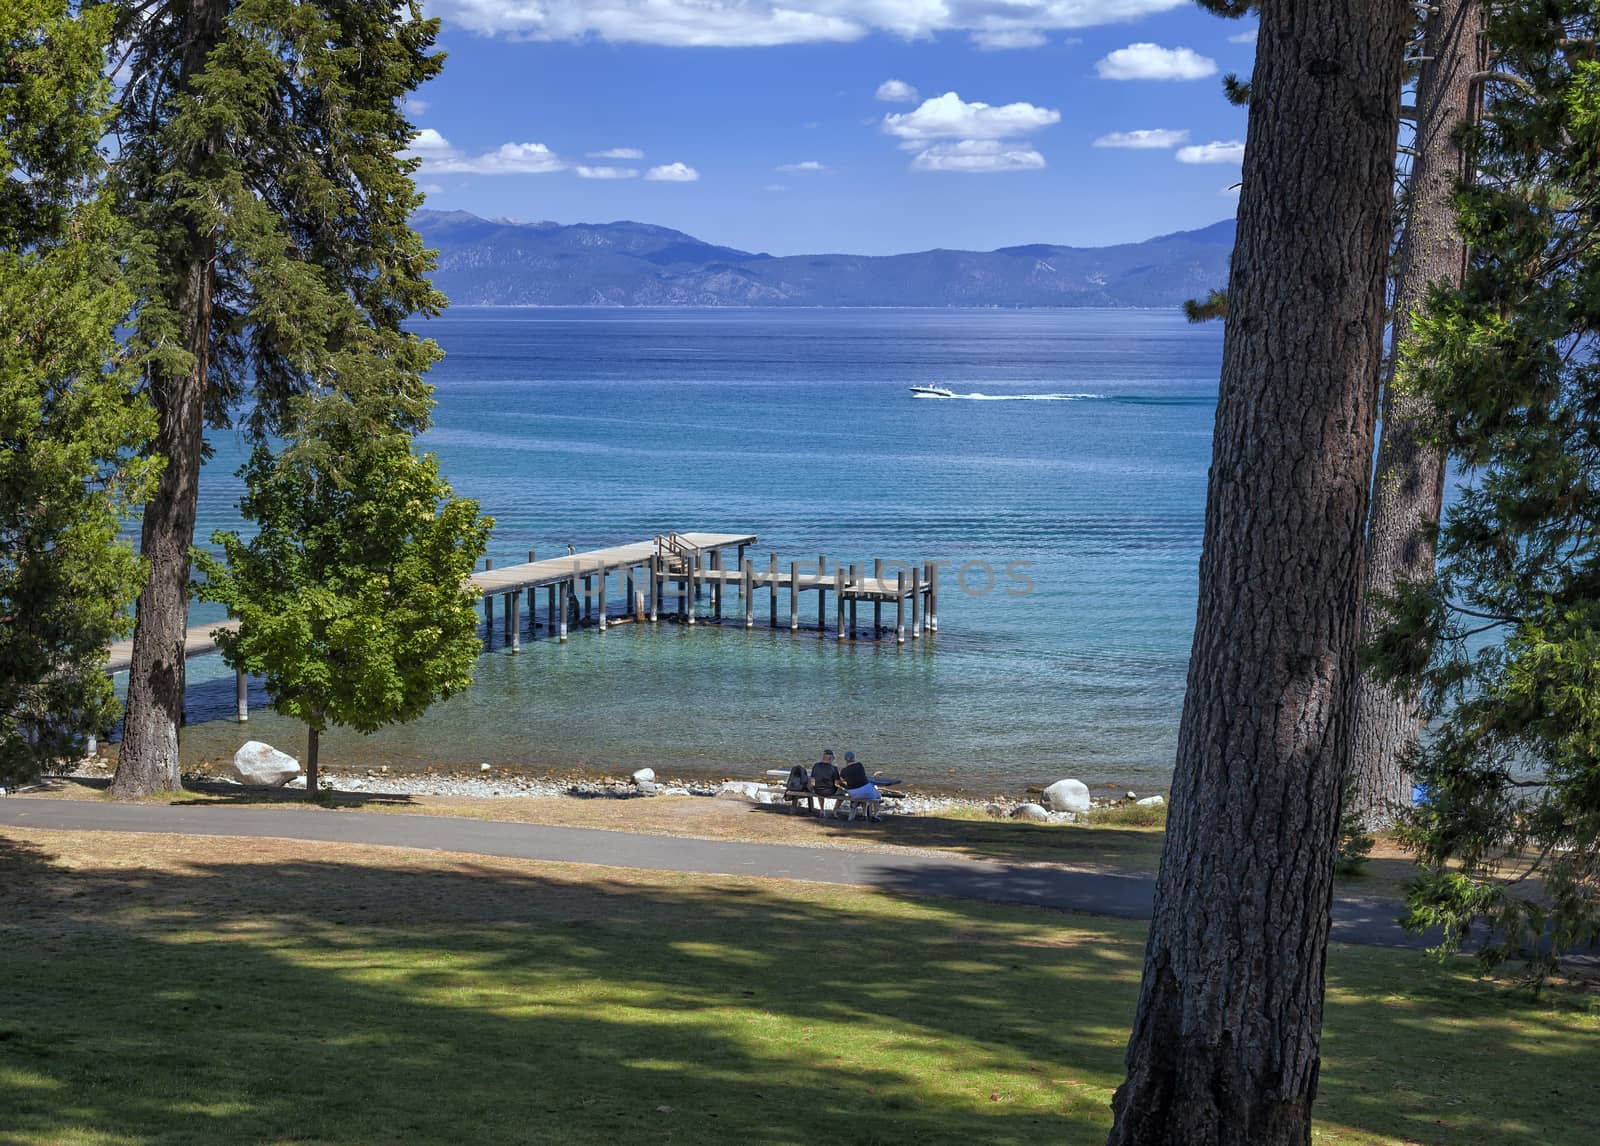 A view of Lake Tahoe from the Sugar Pine Point looking down on the park's boat dock.